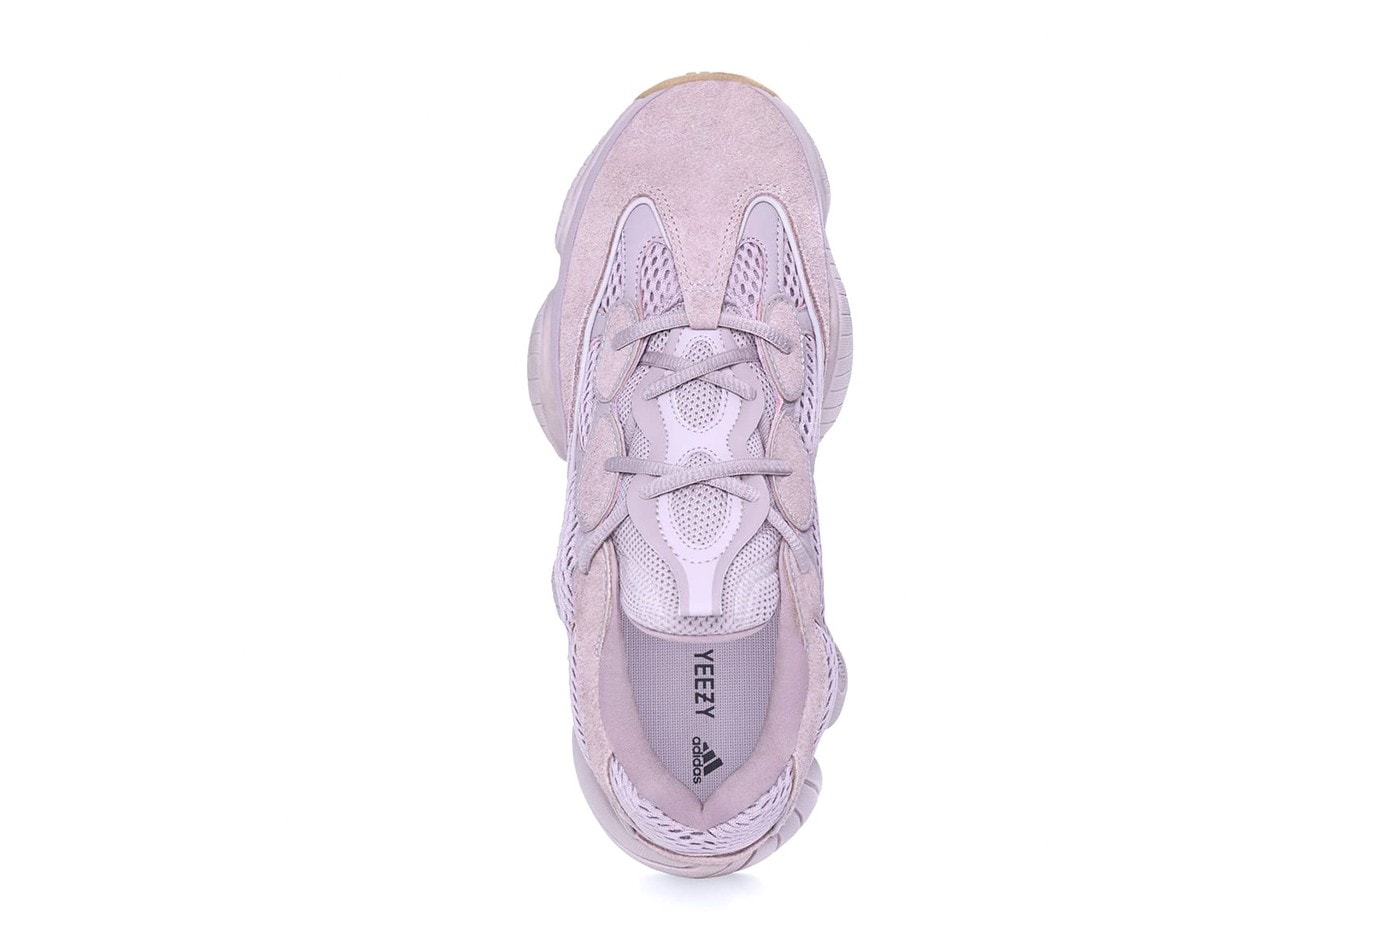 adidas YEEZY BOOST 500 "Soft Vision" Pastel Purple Release Date Closer Look Kanye West